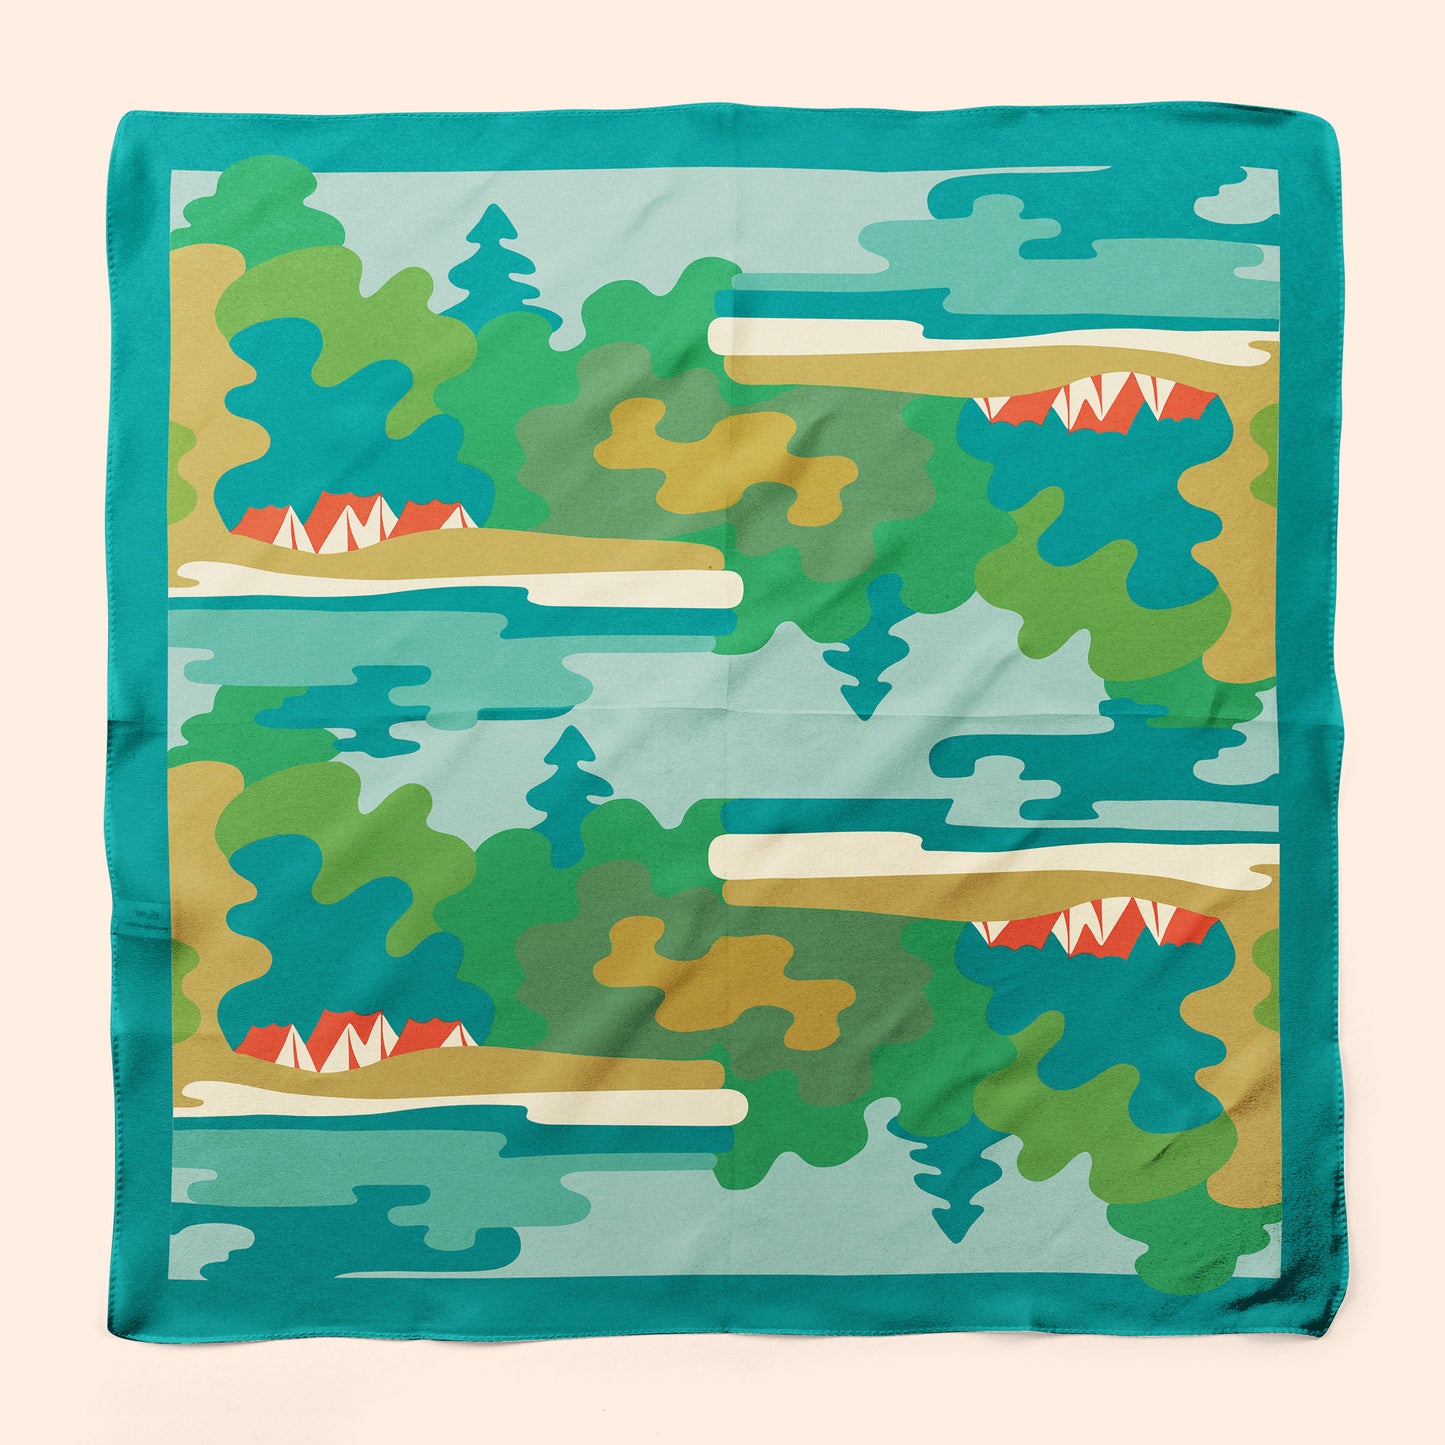 Colorful lakeside camping scene on a 100% silk scarf. This is a charming, and nature-inspired square scarf